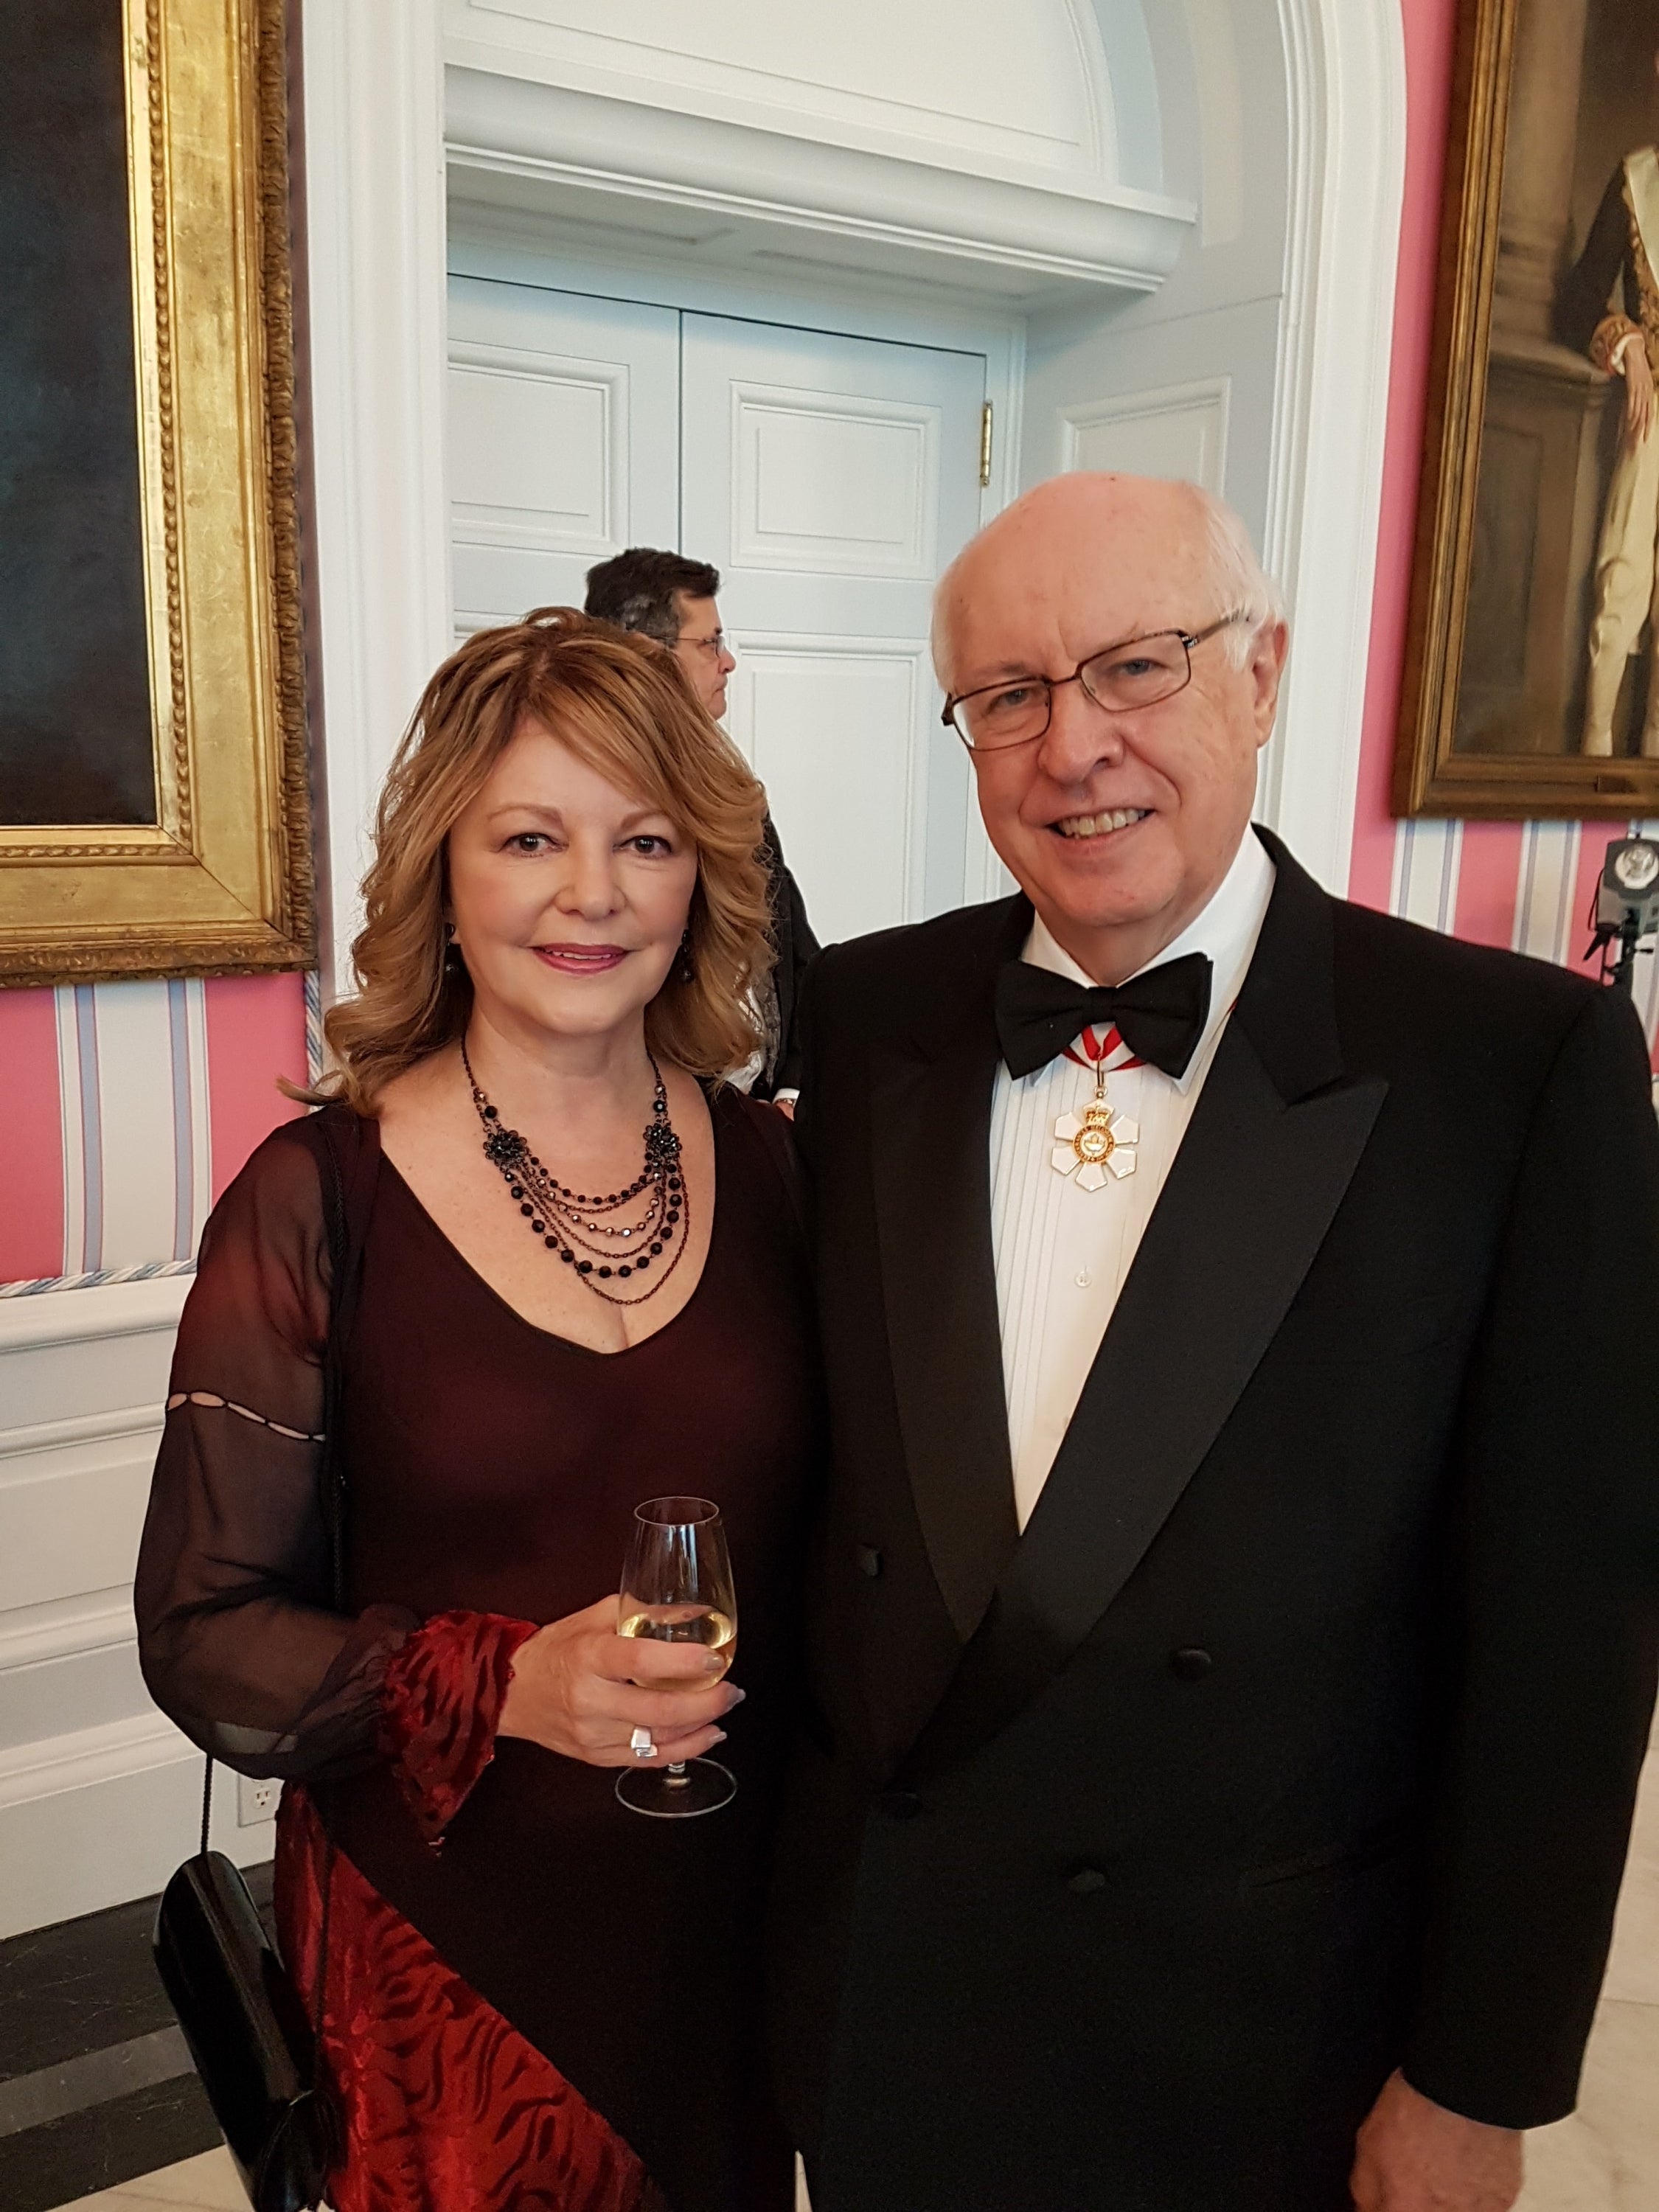 John English with his wife Irene at Rideau Hall